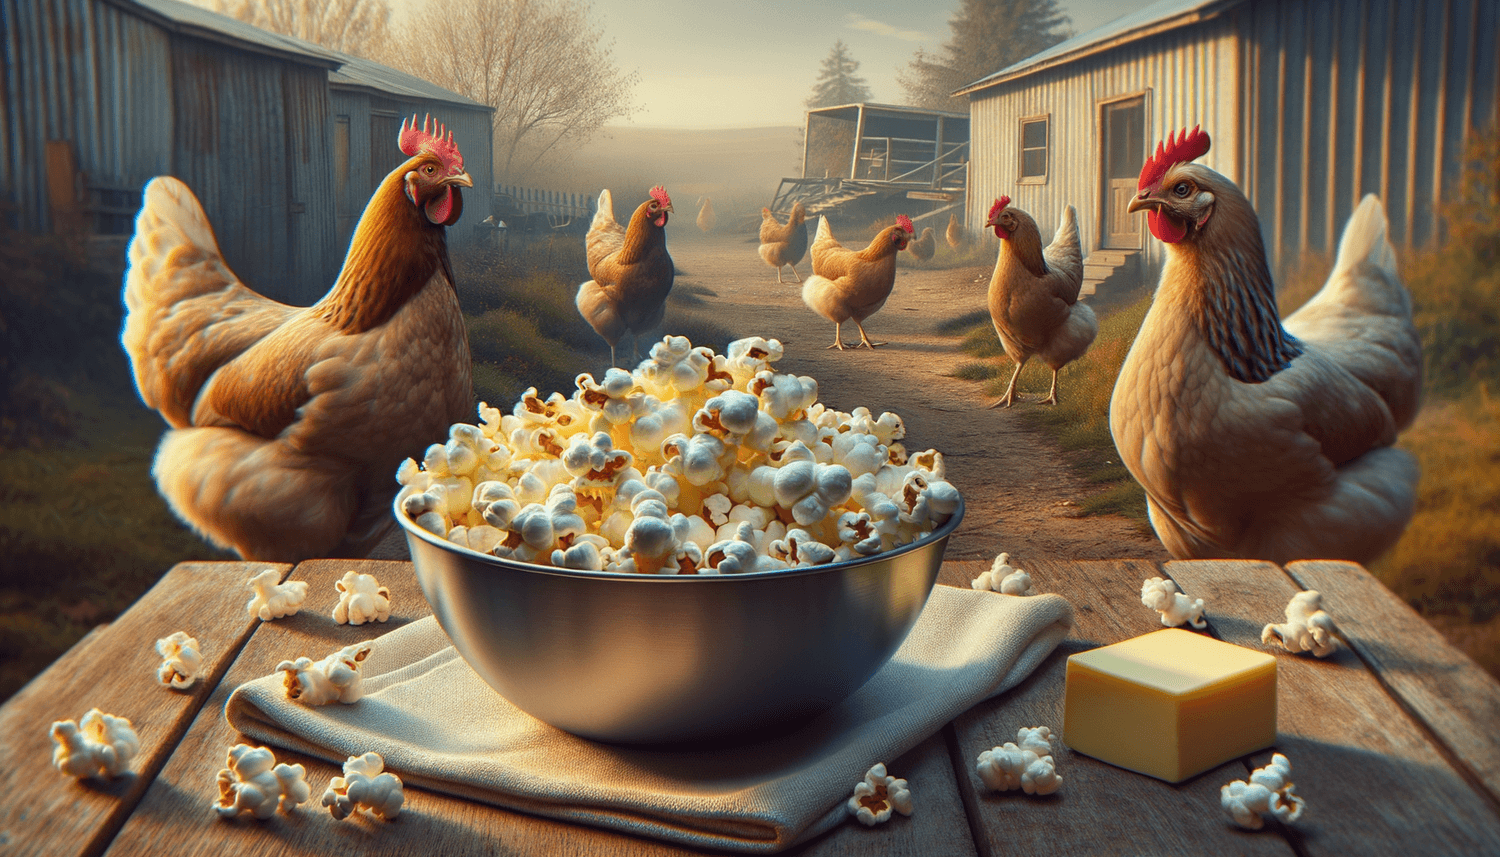 Can Chickens Eat Popcorn with Butter?